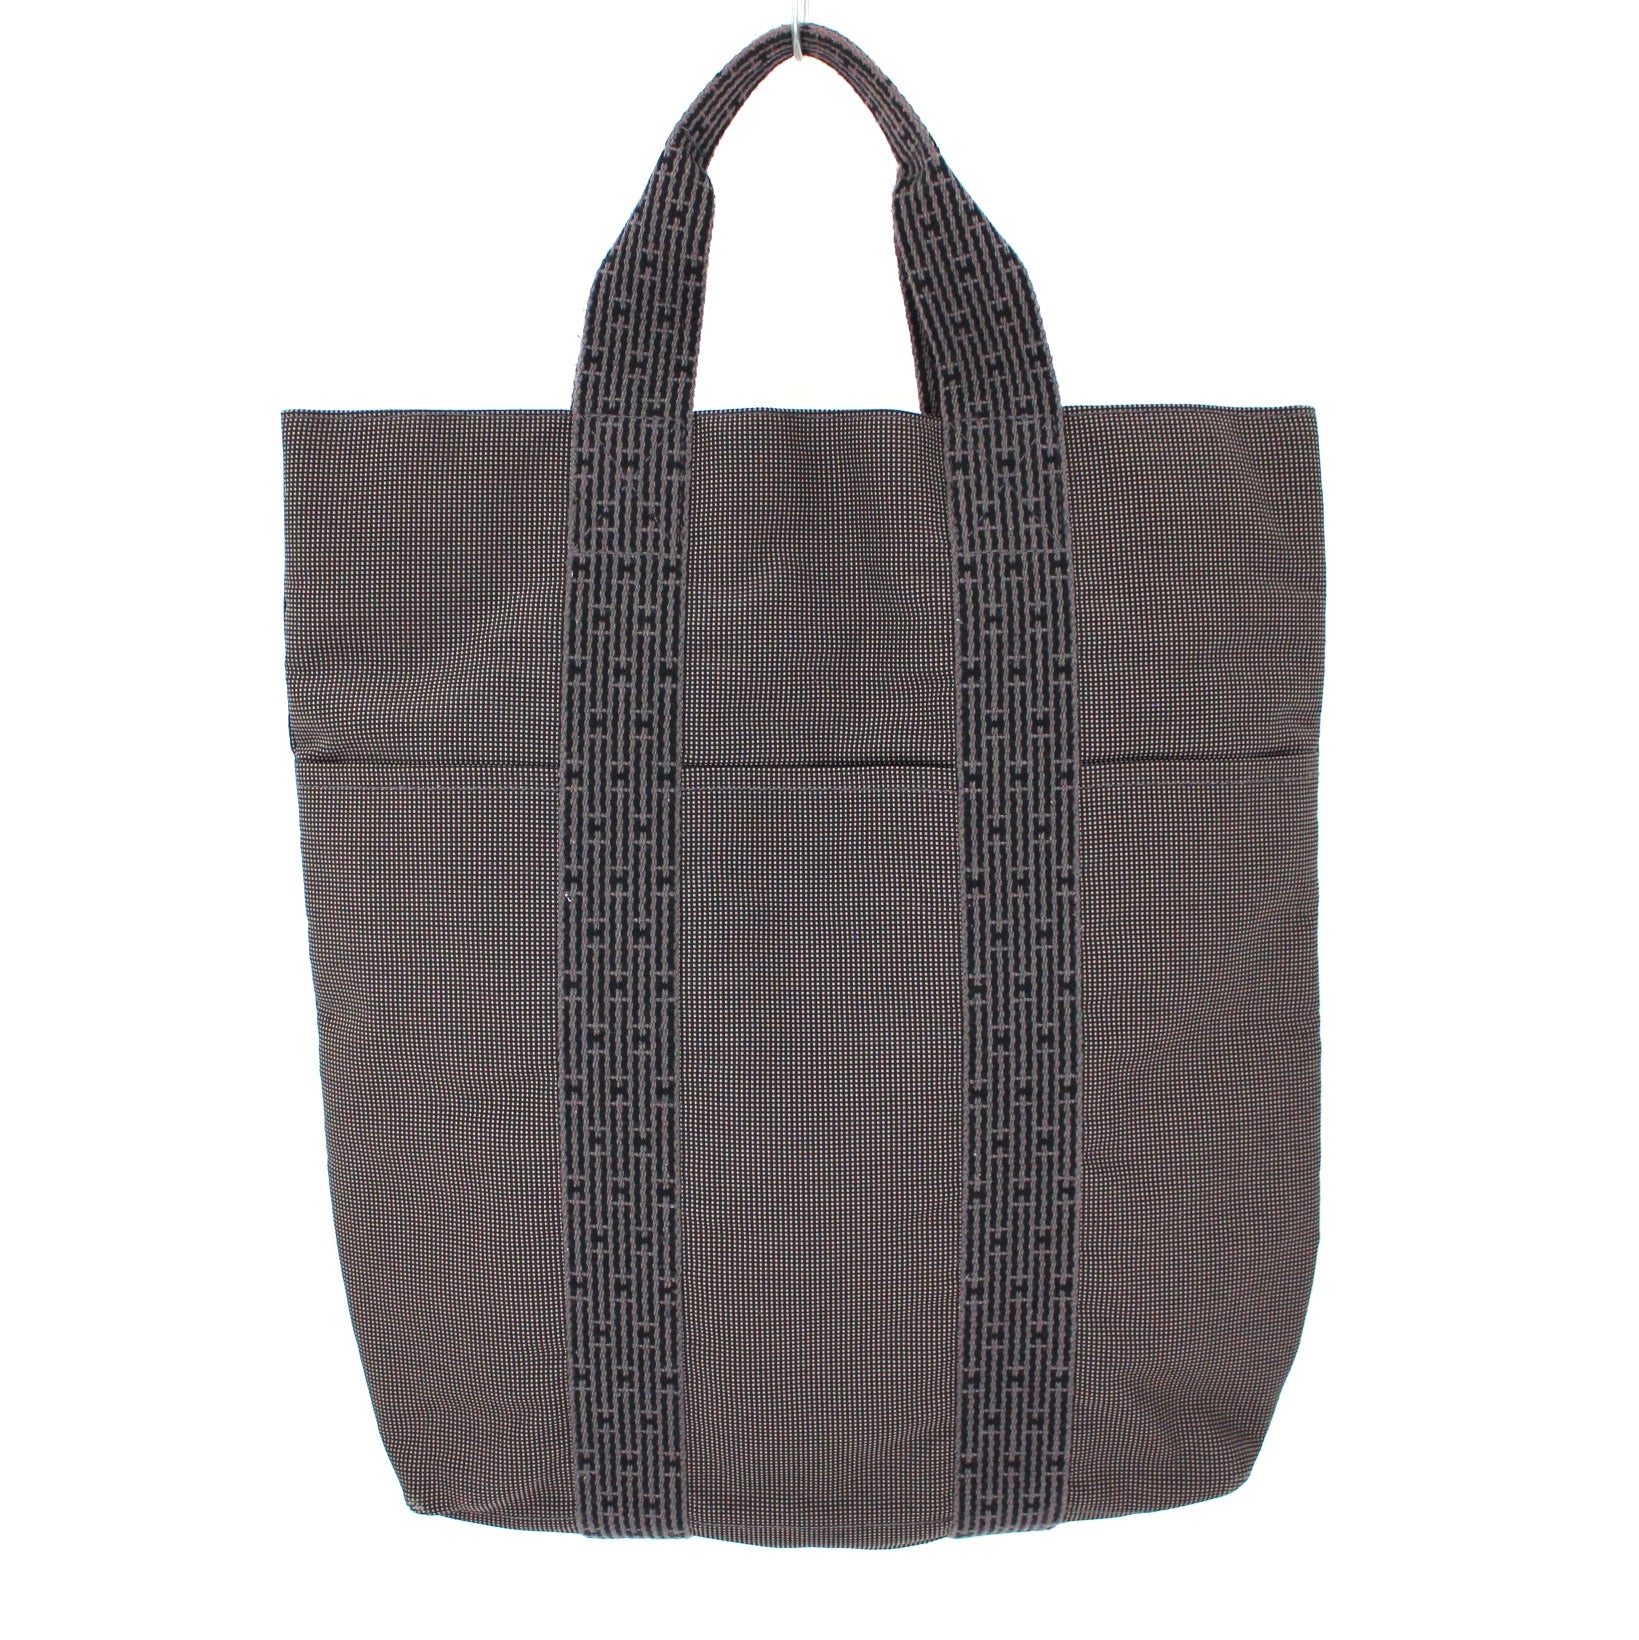 Hermes Herline Large Gray/Brown Canvas Fabric Tote Bag